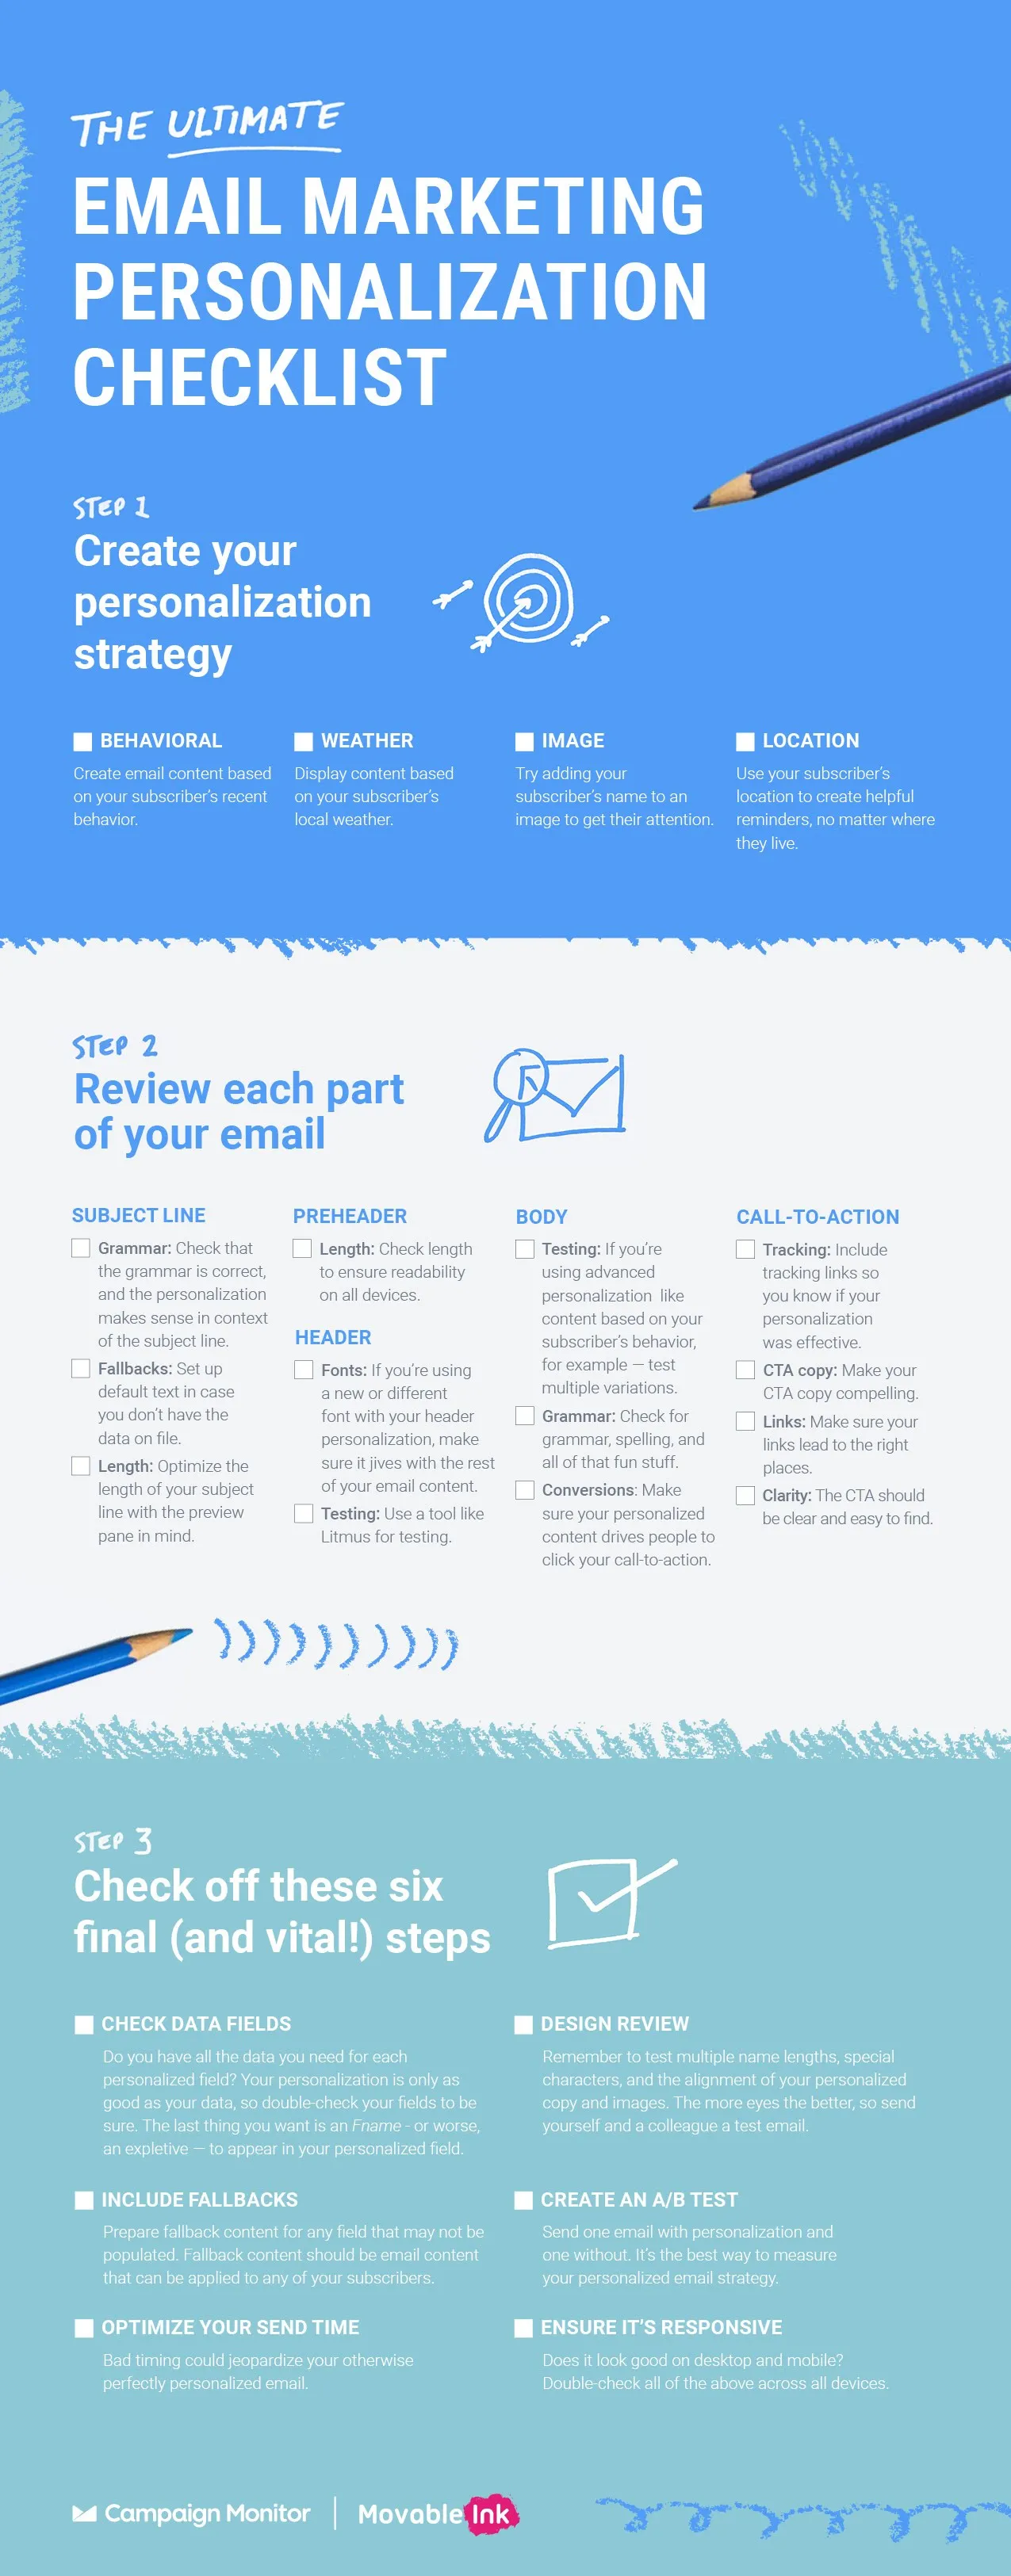 The Ultimate Email Marketing Personalization Checklist - #infographic